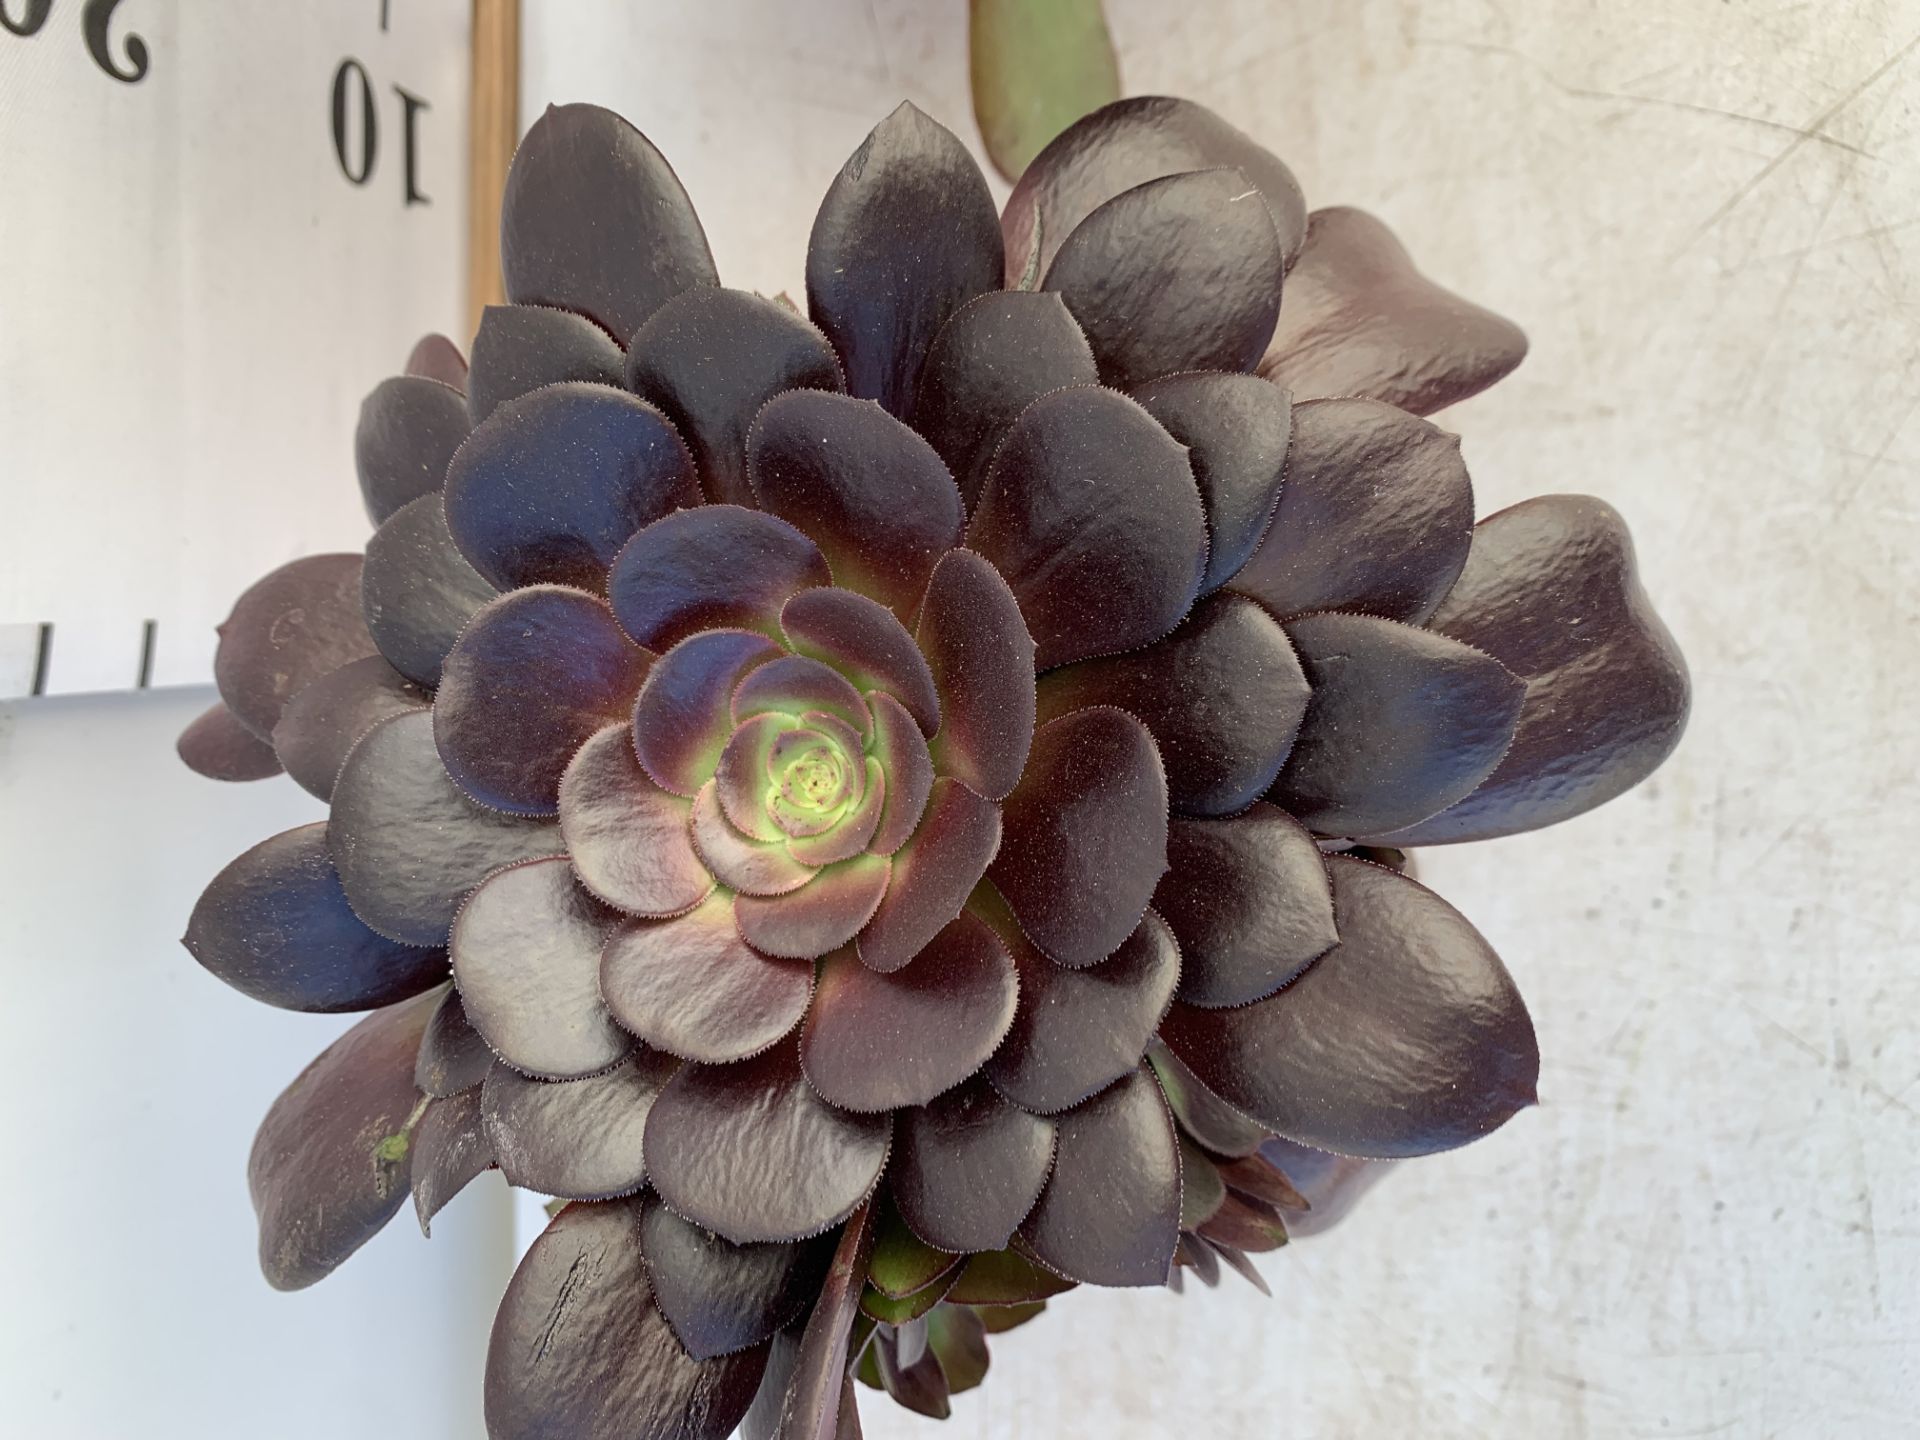 TWO AEONIUM ARBOREUM VELOURS IN 1 LTR POTS 25CM TALL PLUS VAT TO BE SOLD FOR THE TWO - Image 7 of 8